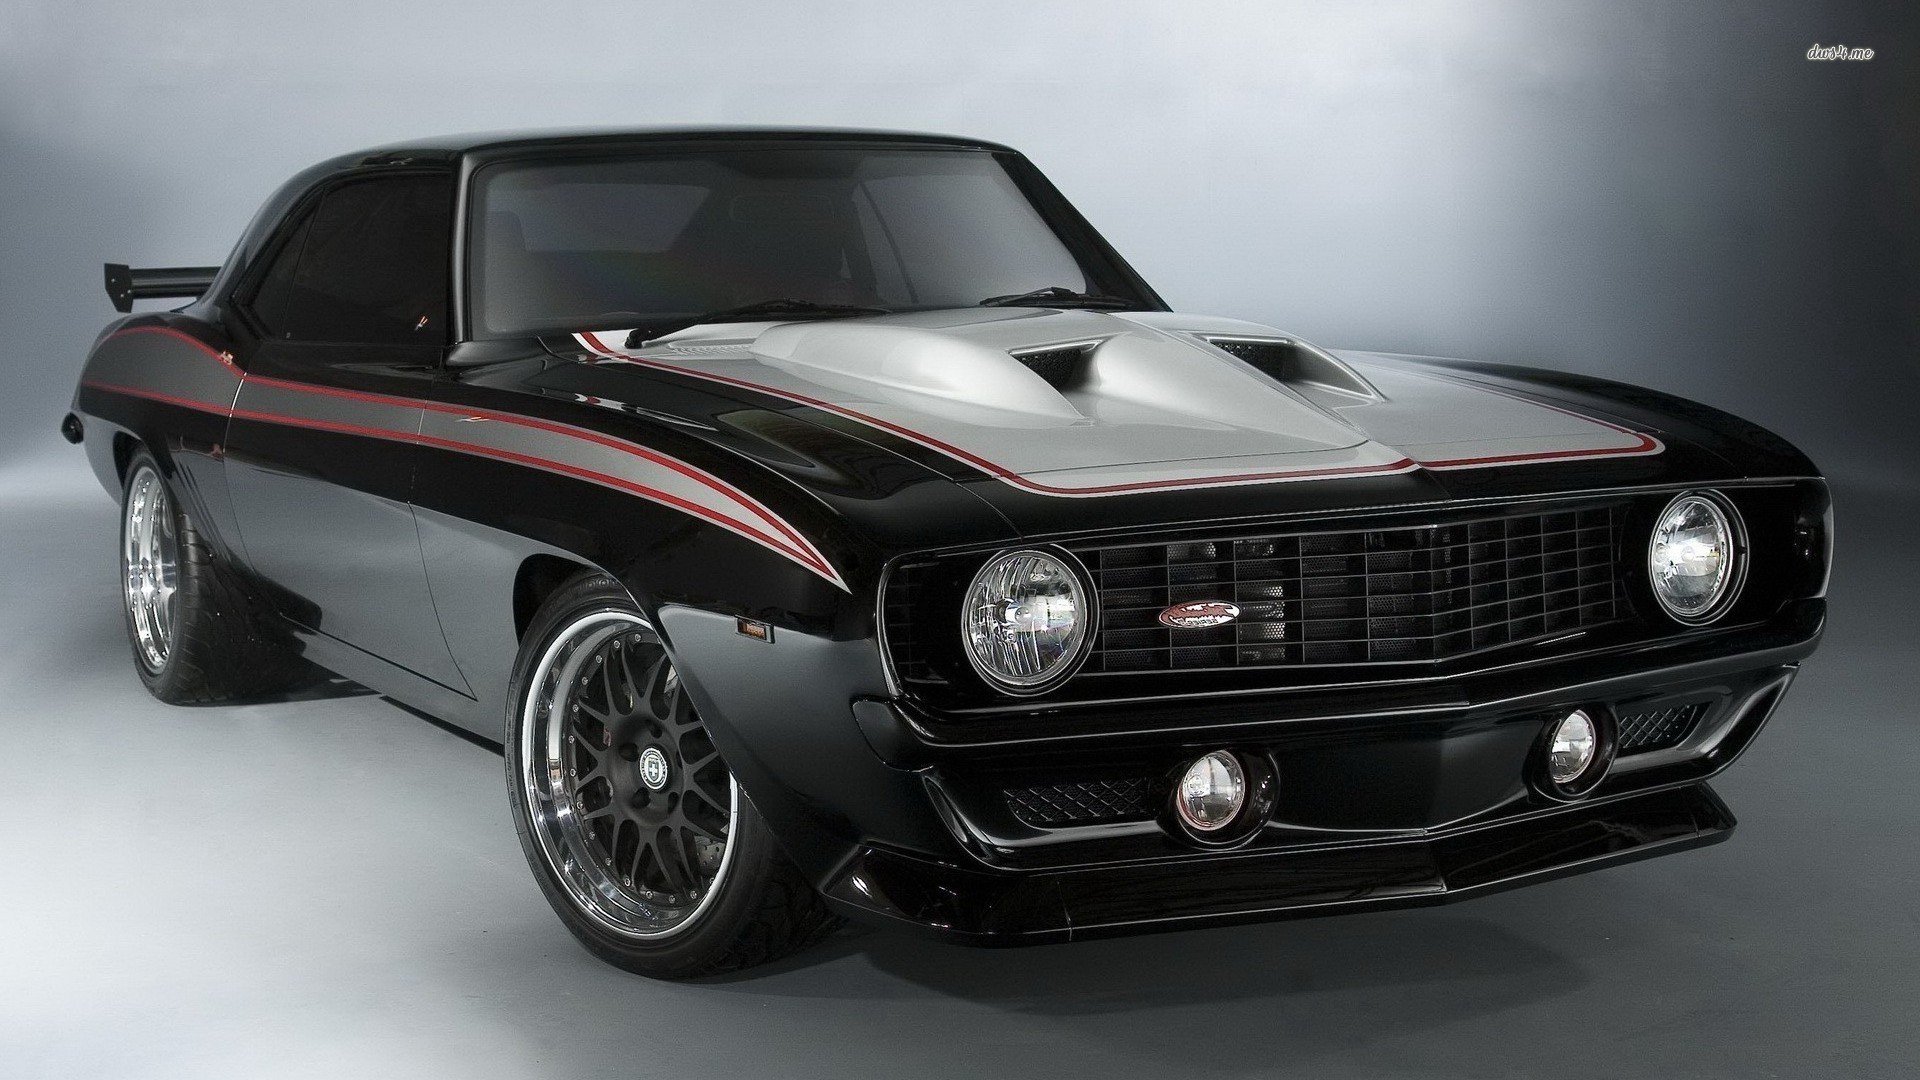 Classic Muscle Cars Wallpaper (70+ images)
 Muscle Car Wallpaper 1920x1080